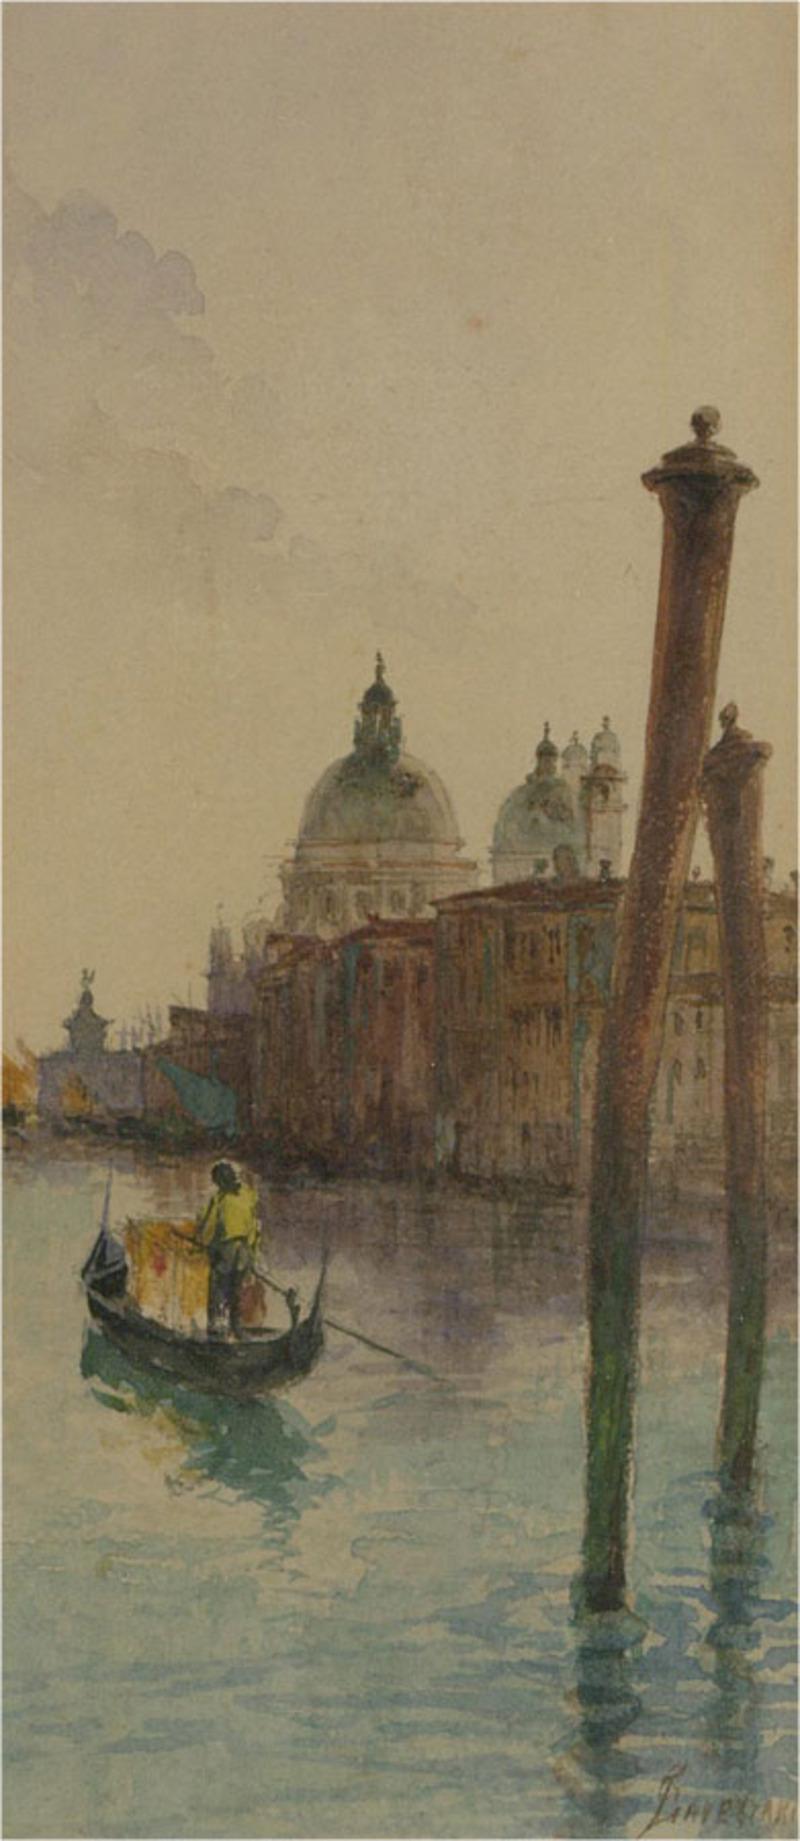 A charming late 19th Century watercolour view of St Mark's Basilica in Venice. A gondola drifts past in the foreground. The artist has signed to the lower right corner and the painting has been presented in a simple contemporary frame with card